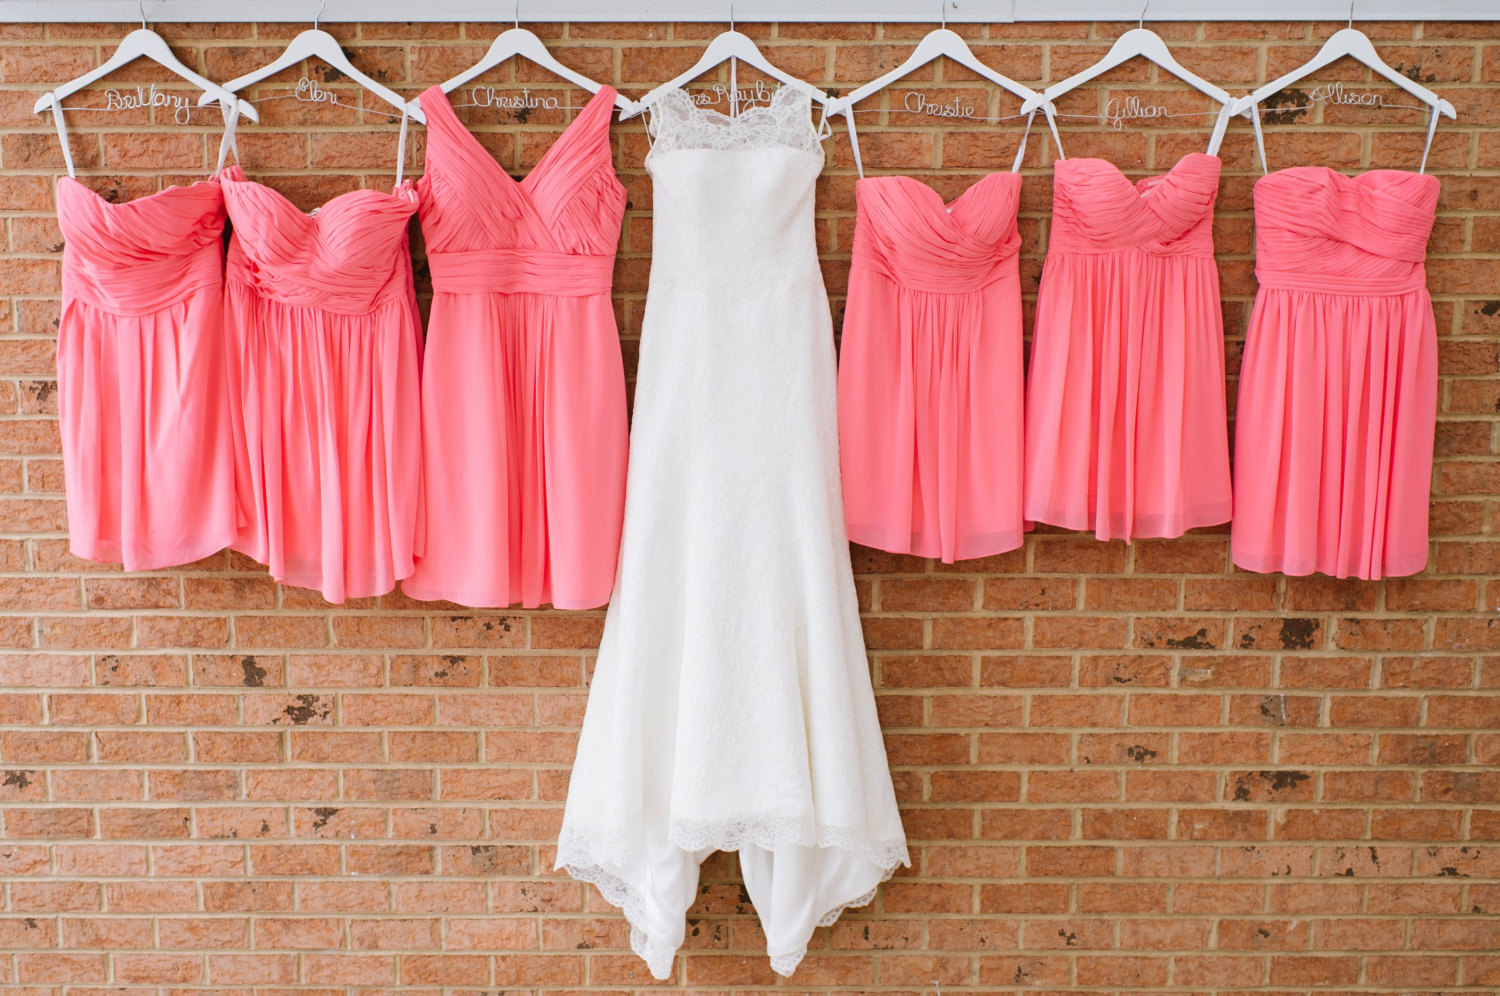 wedding-dress-with-personalized-hanger-next-to-bridesmaid-dresses-with-personalized-hangers